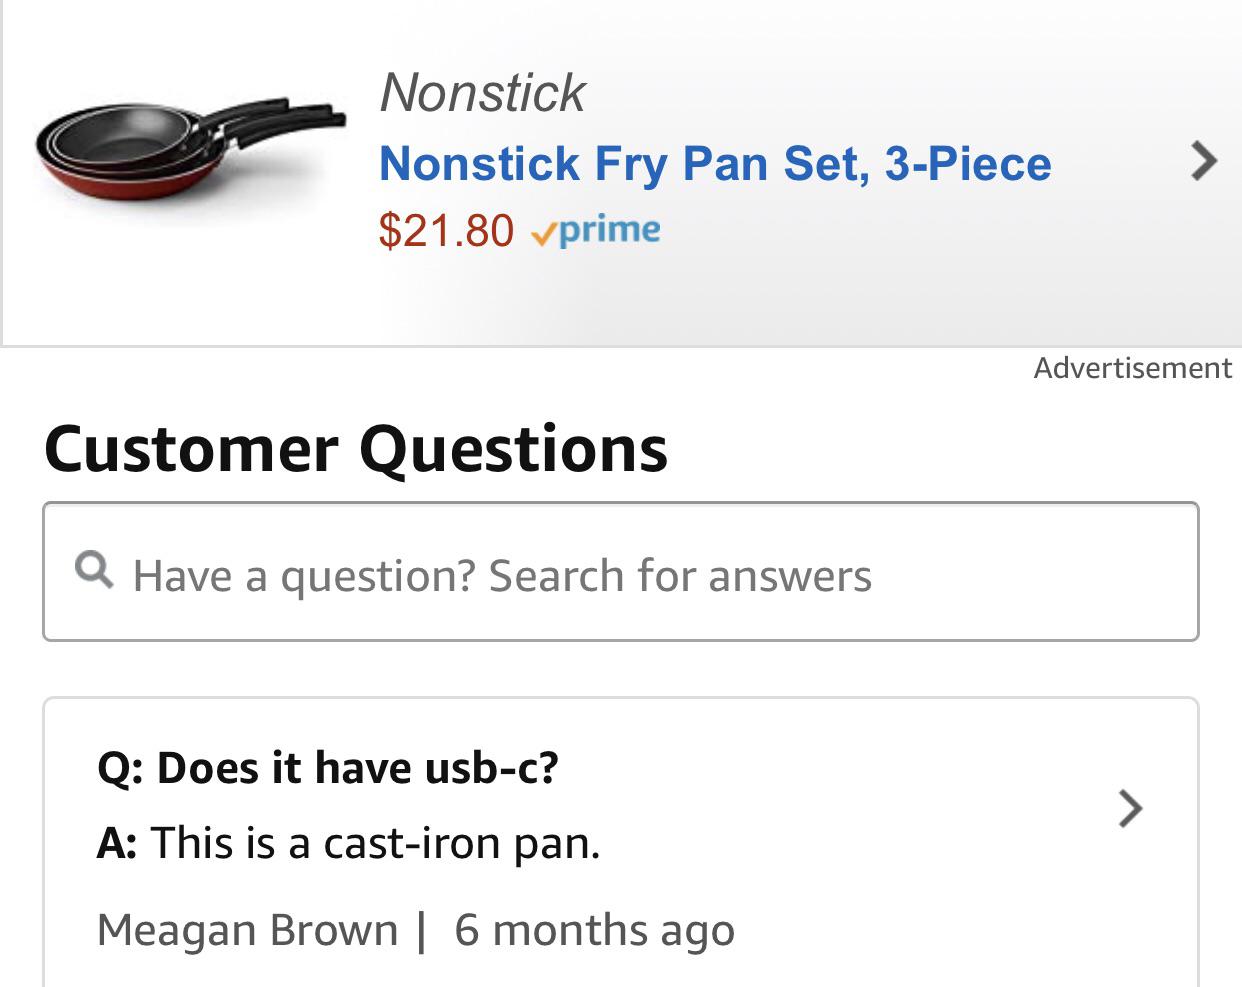 angle - Nonstick Nonstick Fry Pan Set, 3Piece $21.80 v prime Advertisement Customer Questions Q Have a question? Search for answers Q Does it have usbc? A This is a castiron pan. Meagan Brown | 6 months ago